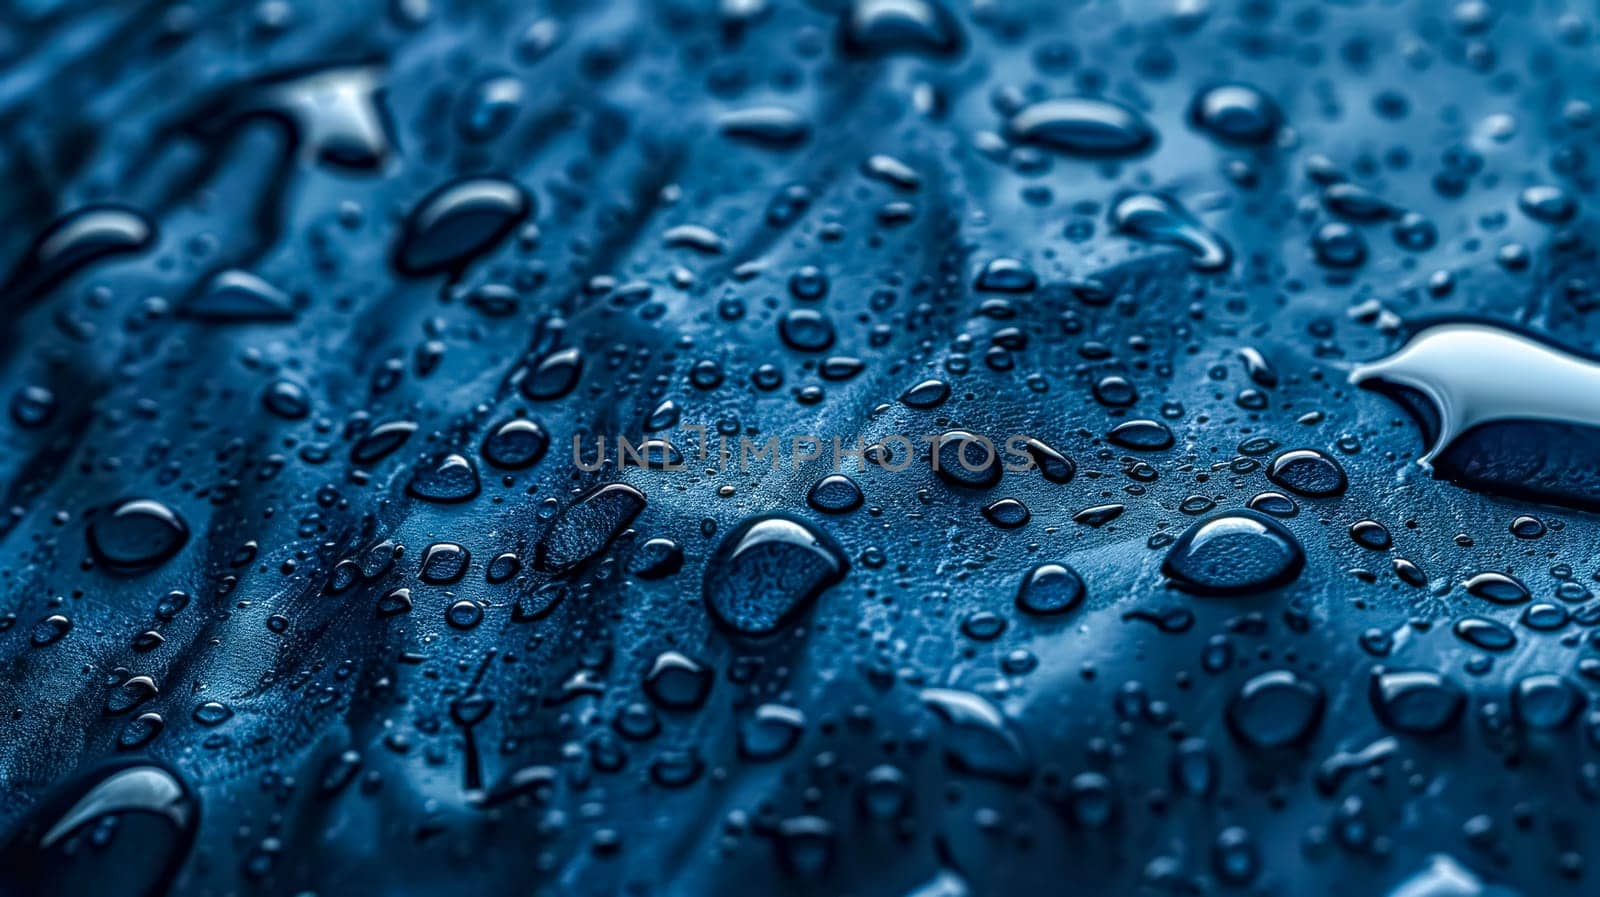 Macro photography highlighting the intricate details of water droplets on a textured blue background